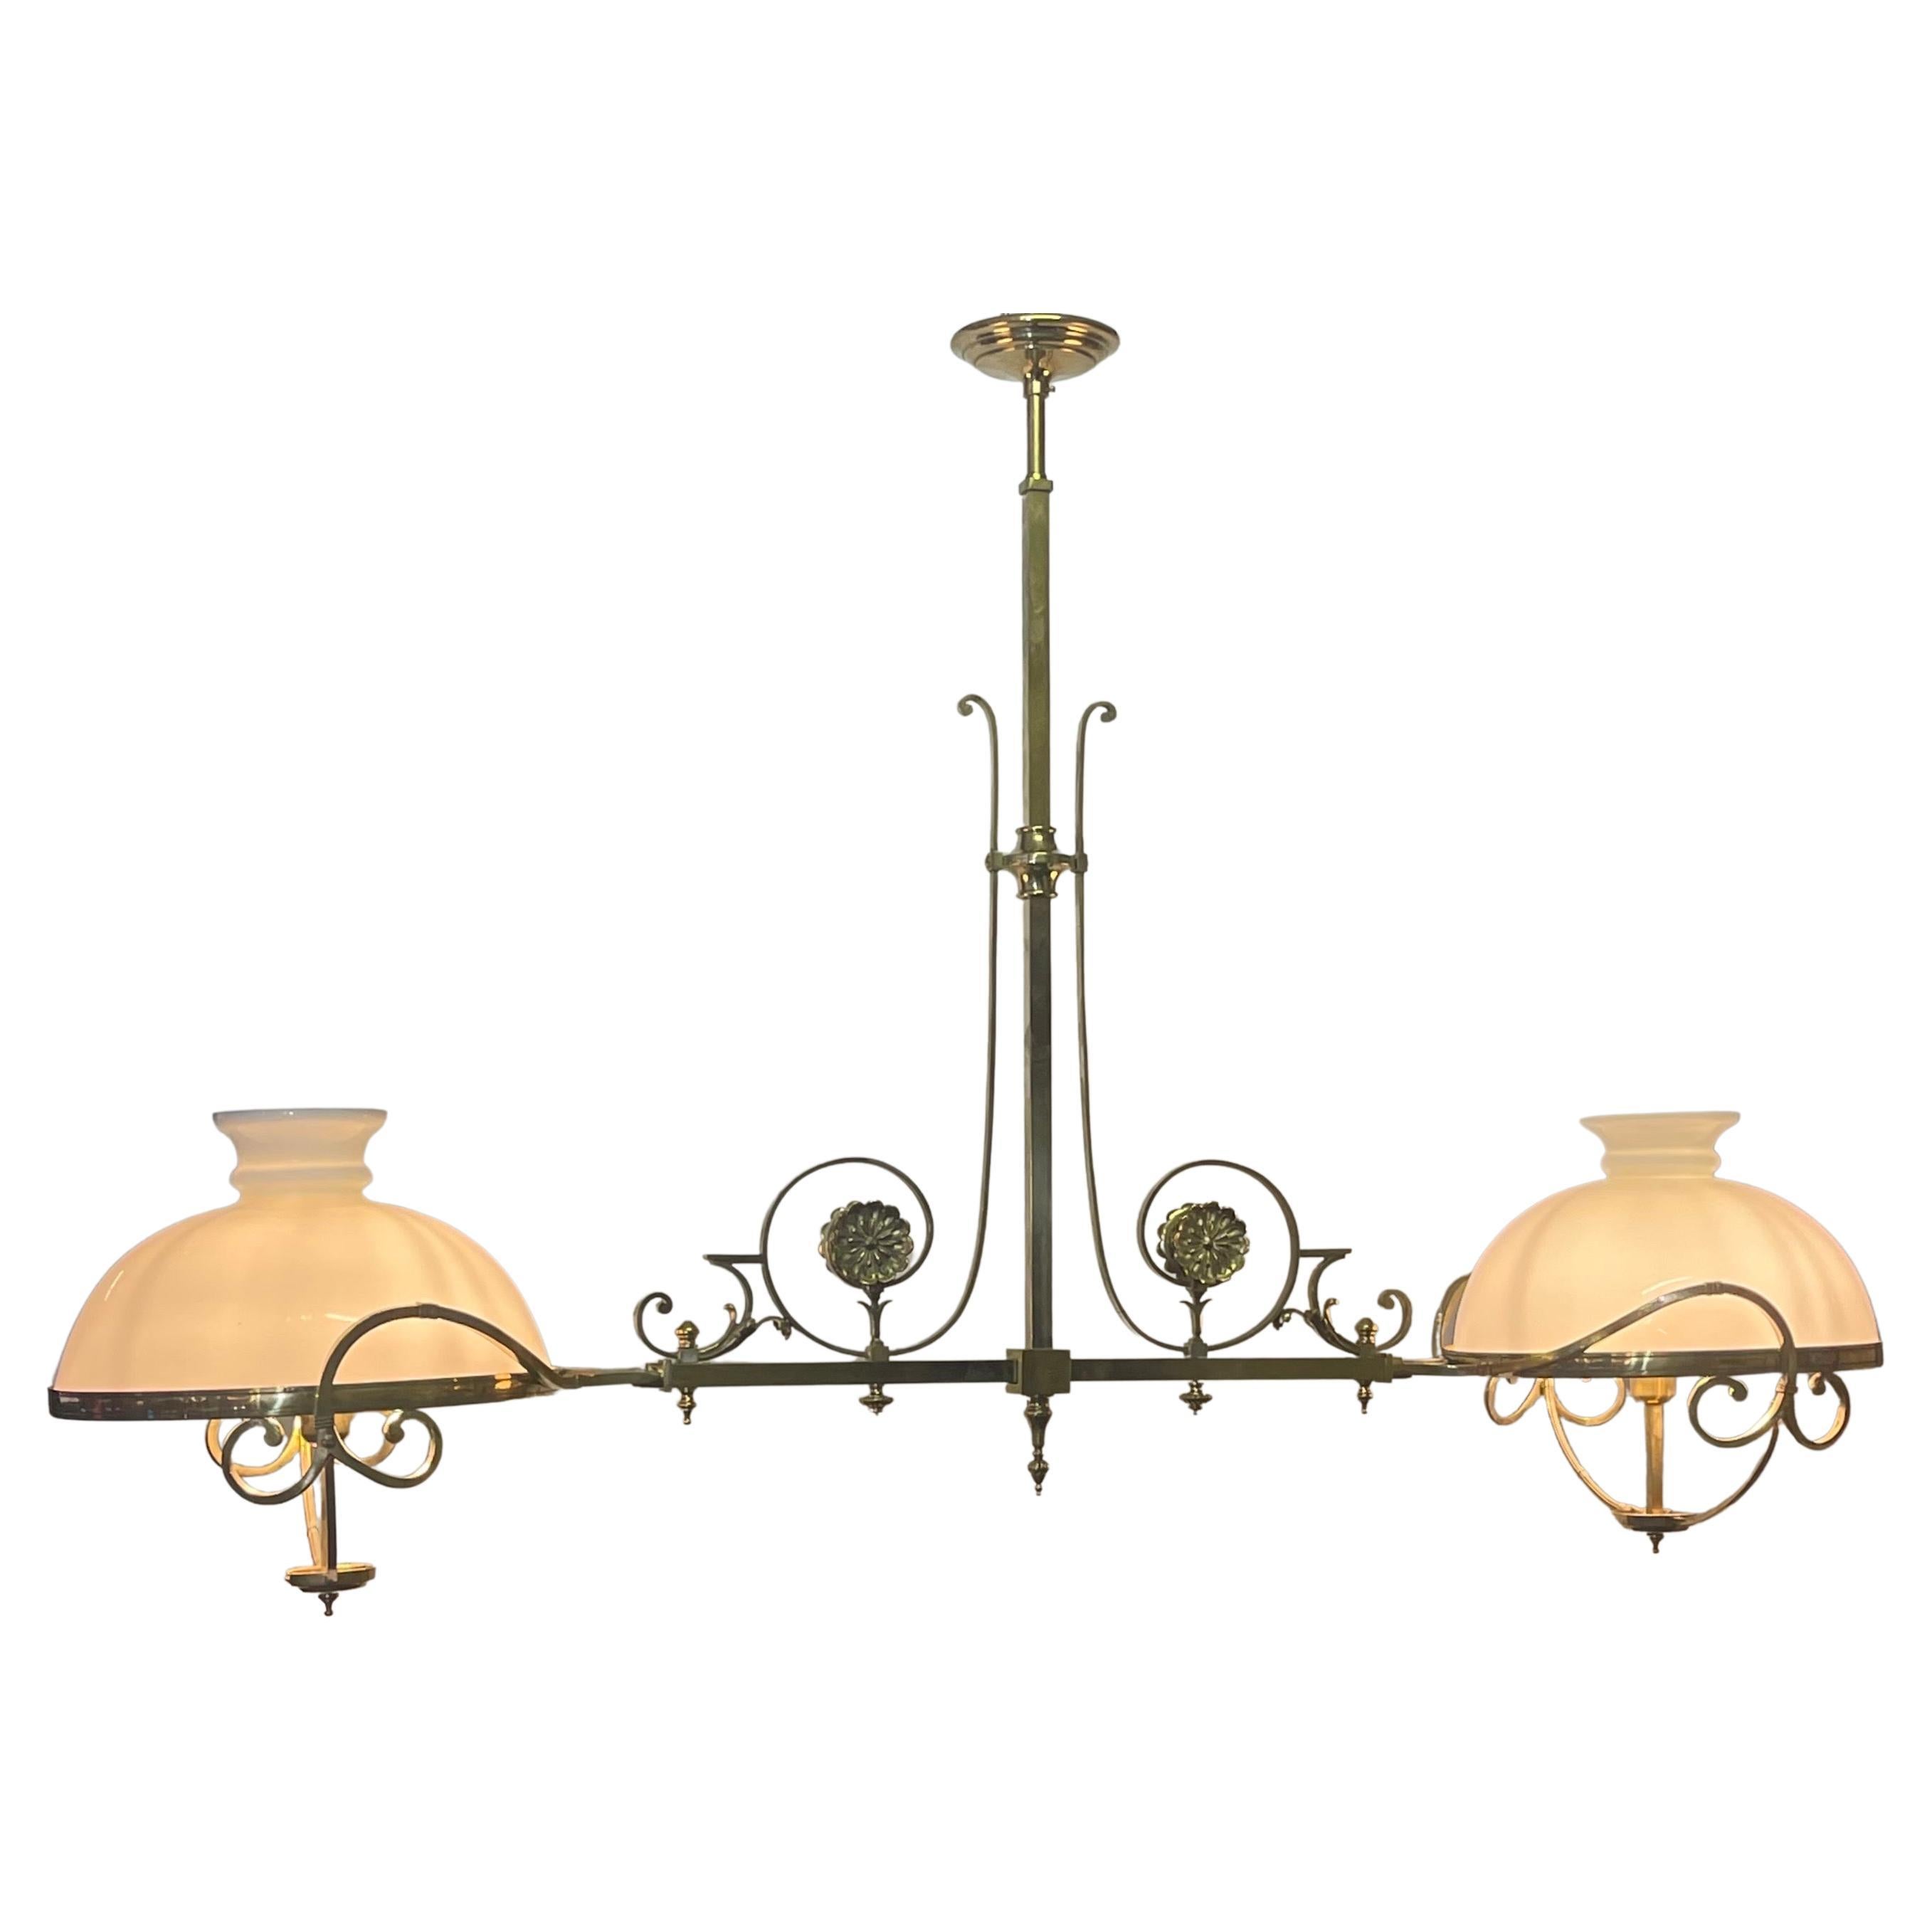 A huge and impressive French Empire brass chandelier for billiard/snooker or kitchen island.
Lamp socket: 2 x E27 or E26 ( US) for standard screw bulbs.
France, circa 1840 - 1860s.
Fully Restored.
The glass shades have been replaced and date